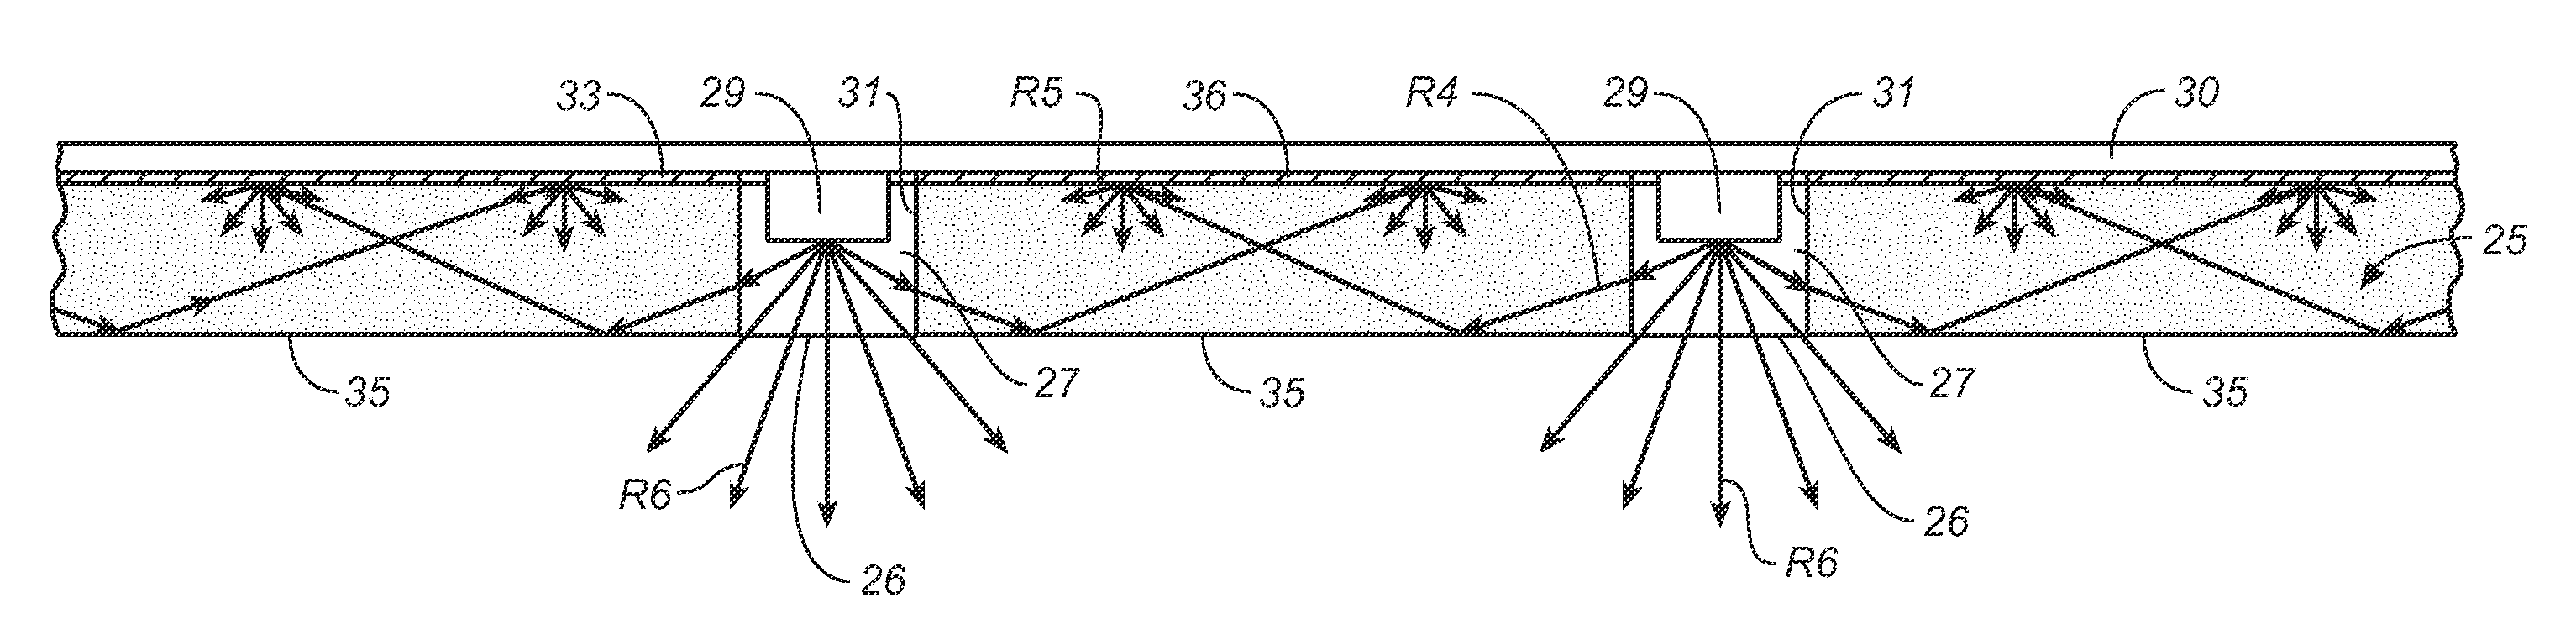 Optical system and method for managing brightness contrasts between high brightness light sources and surrounding surfaces